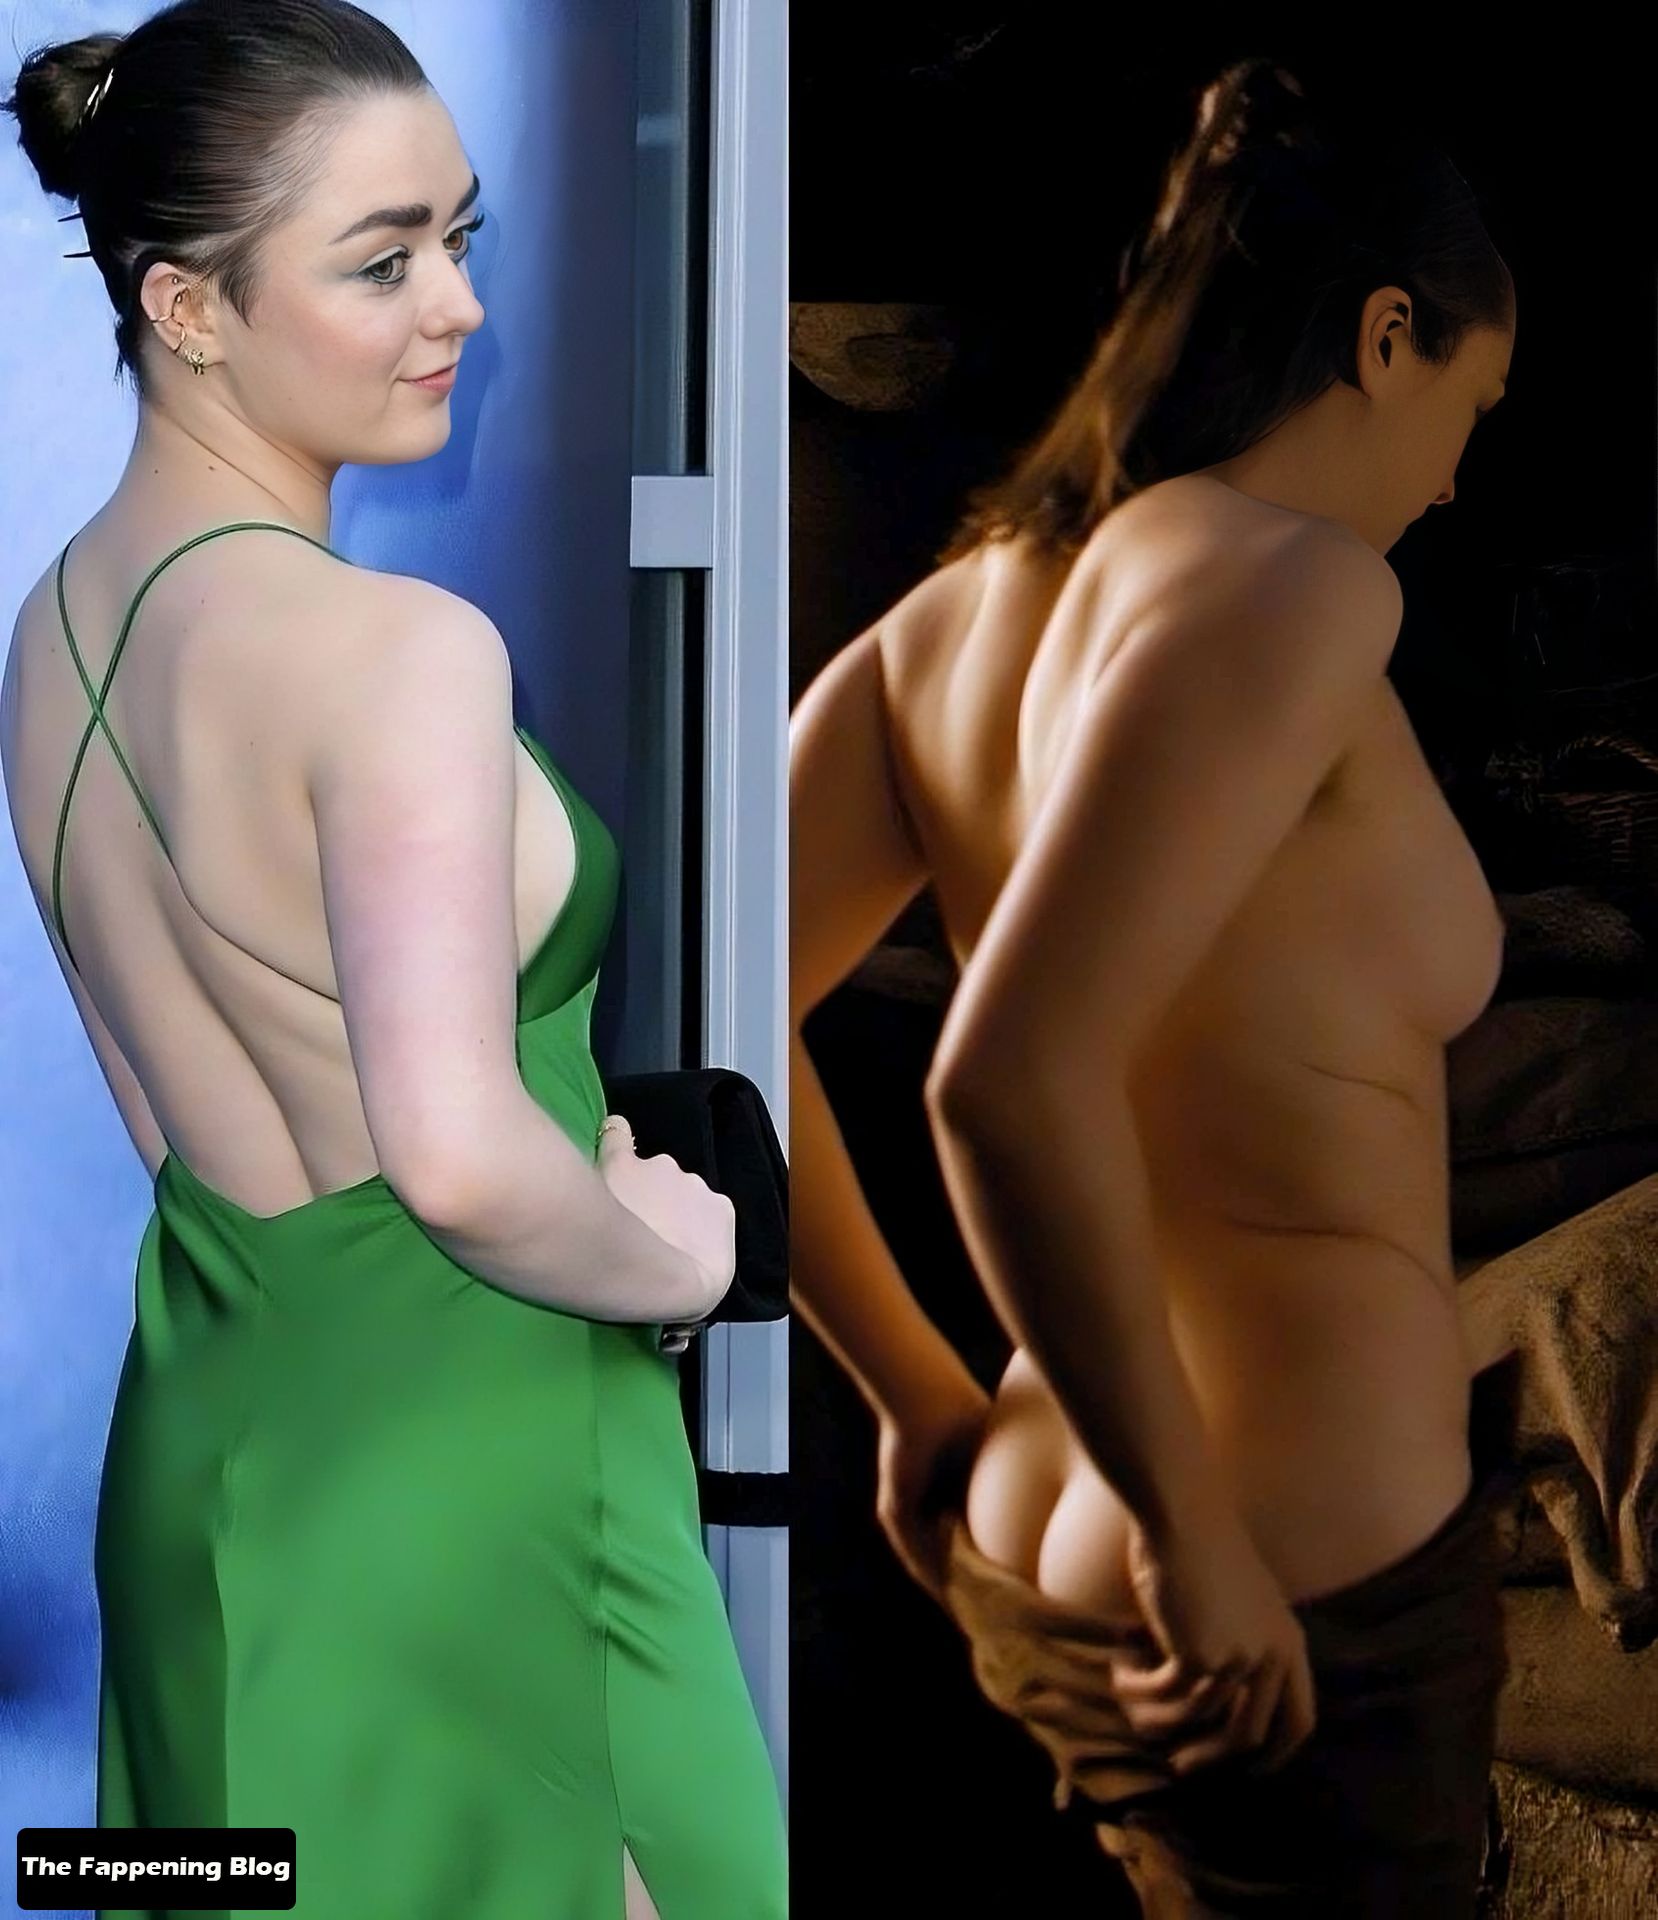 Maisie Williams The Fappening Blog 1 - Maisie Williams Nude & Sexy Collection (7 Photos + Video)